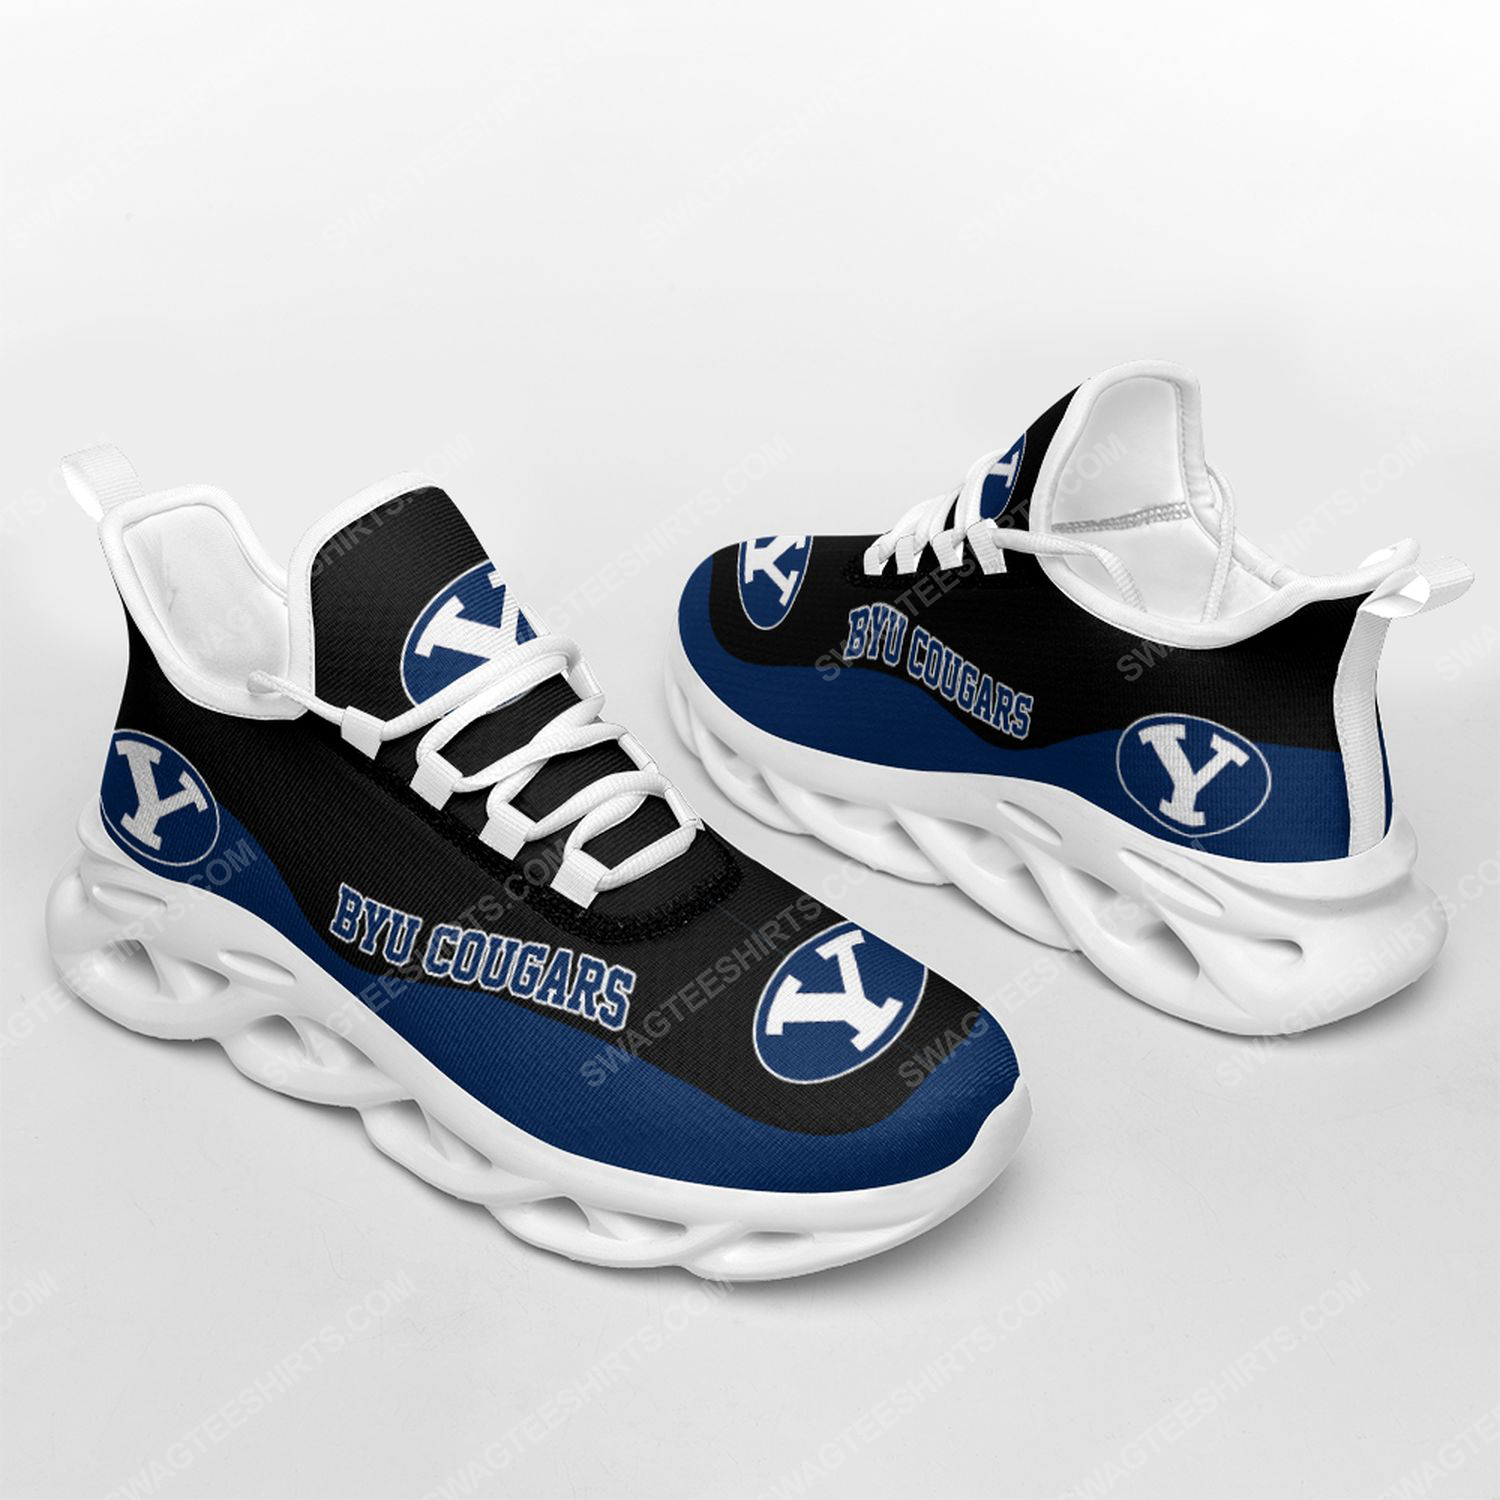 [special edition] The byu cougars football team max soul shoes – Maria